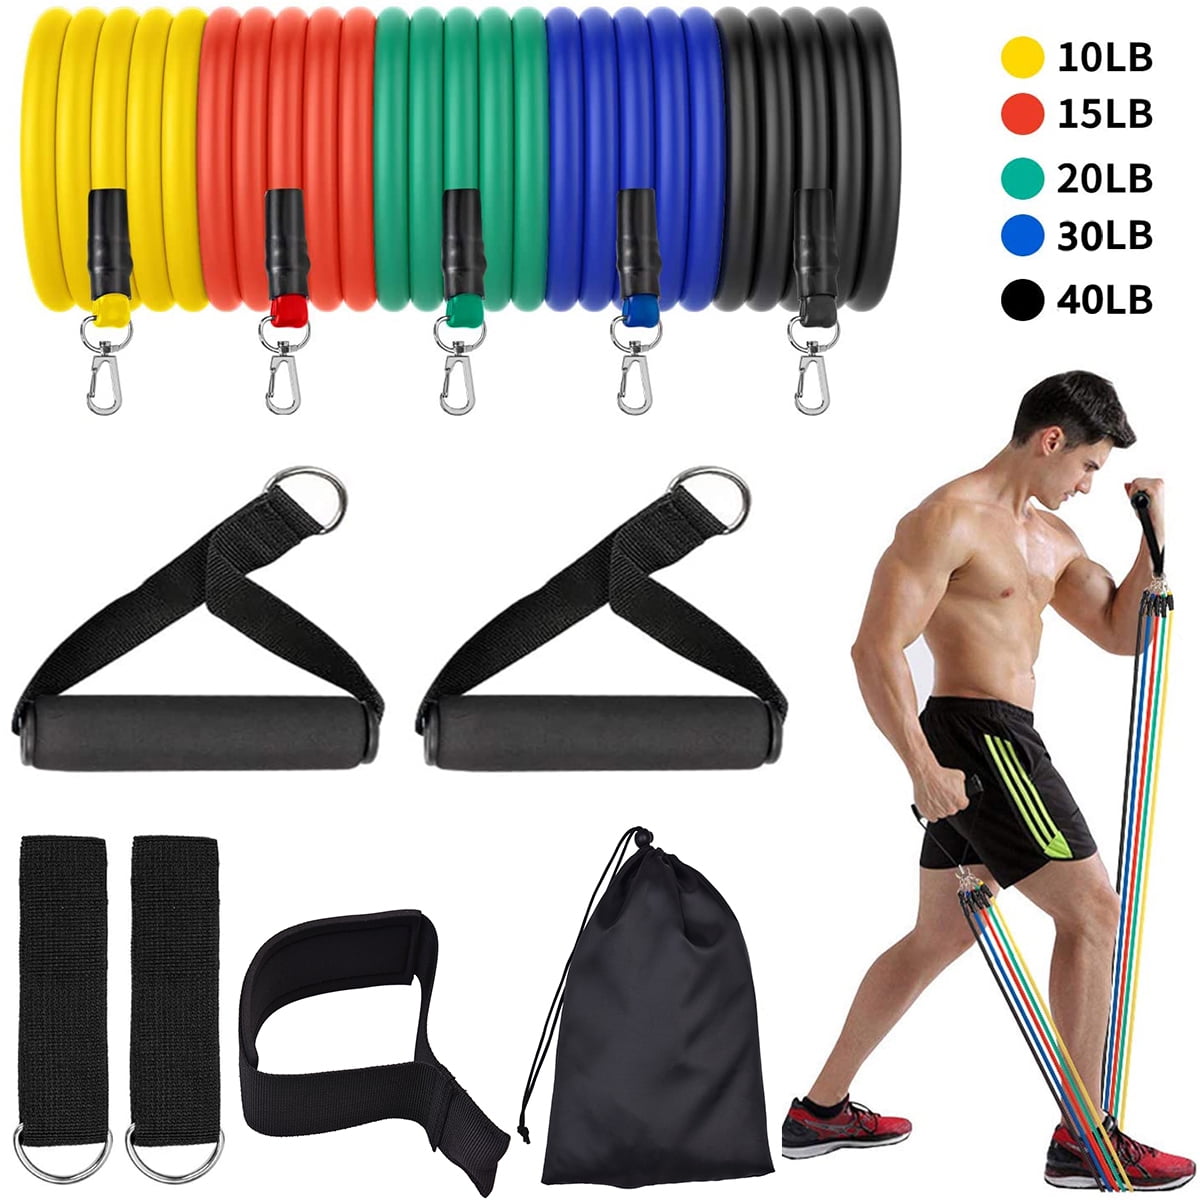 11 pcs Resistance Bands Set Workout Bands With Metal Clips Handles Ankle Strap 